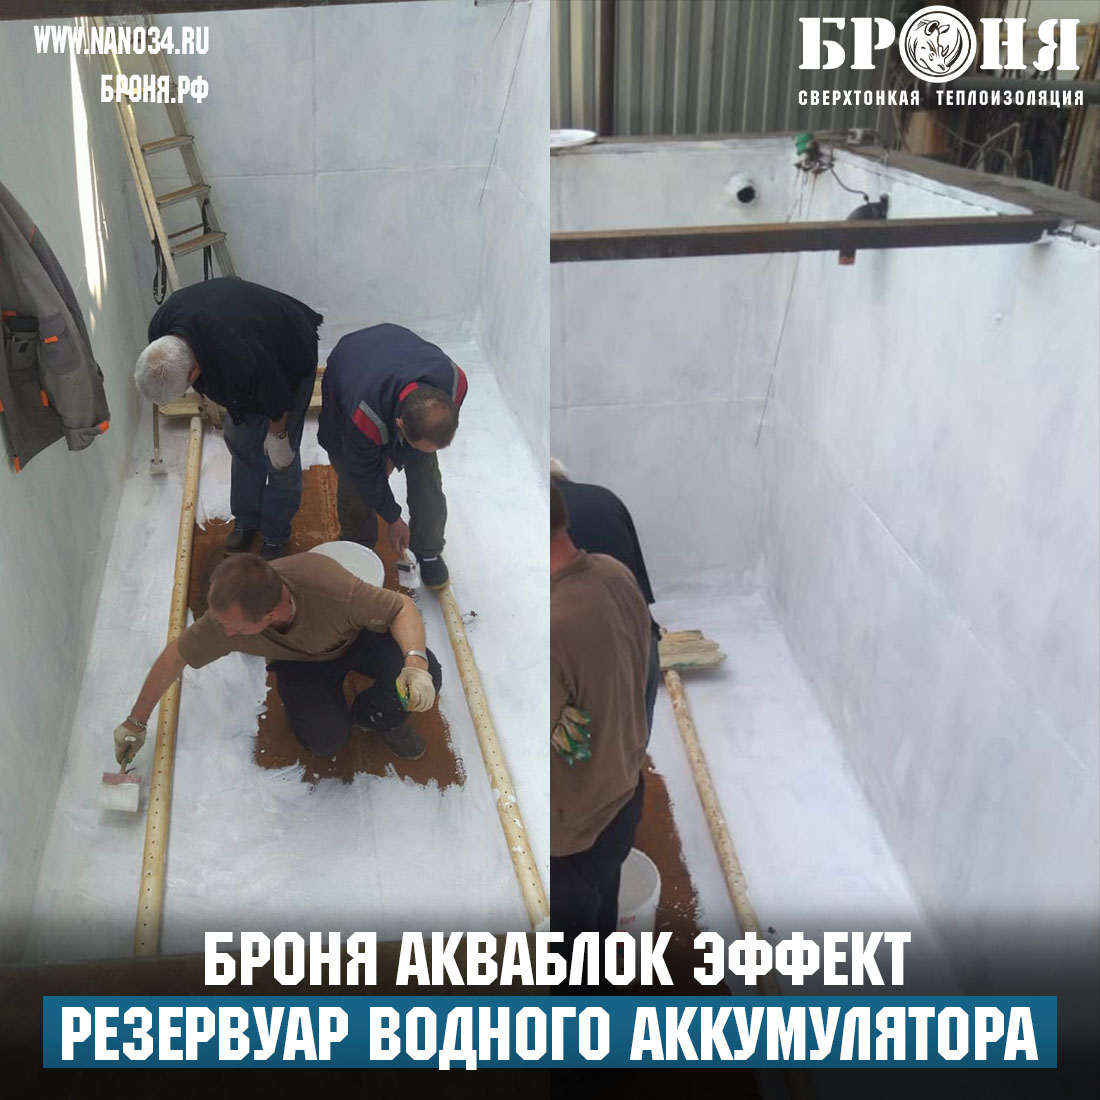 Application of Bronya Aquablock Effect on the walls of the cold water accumulator tank in Khabarovsk (photo and video)